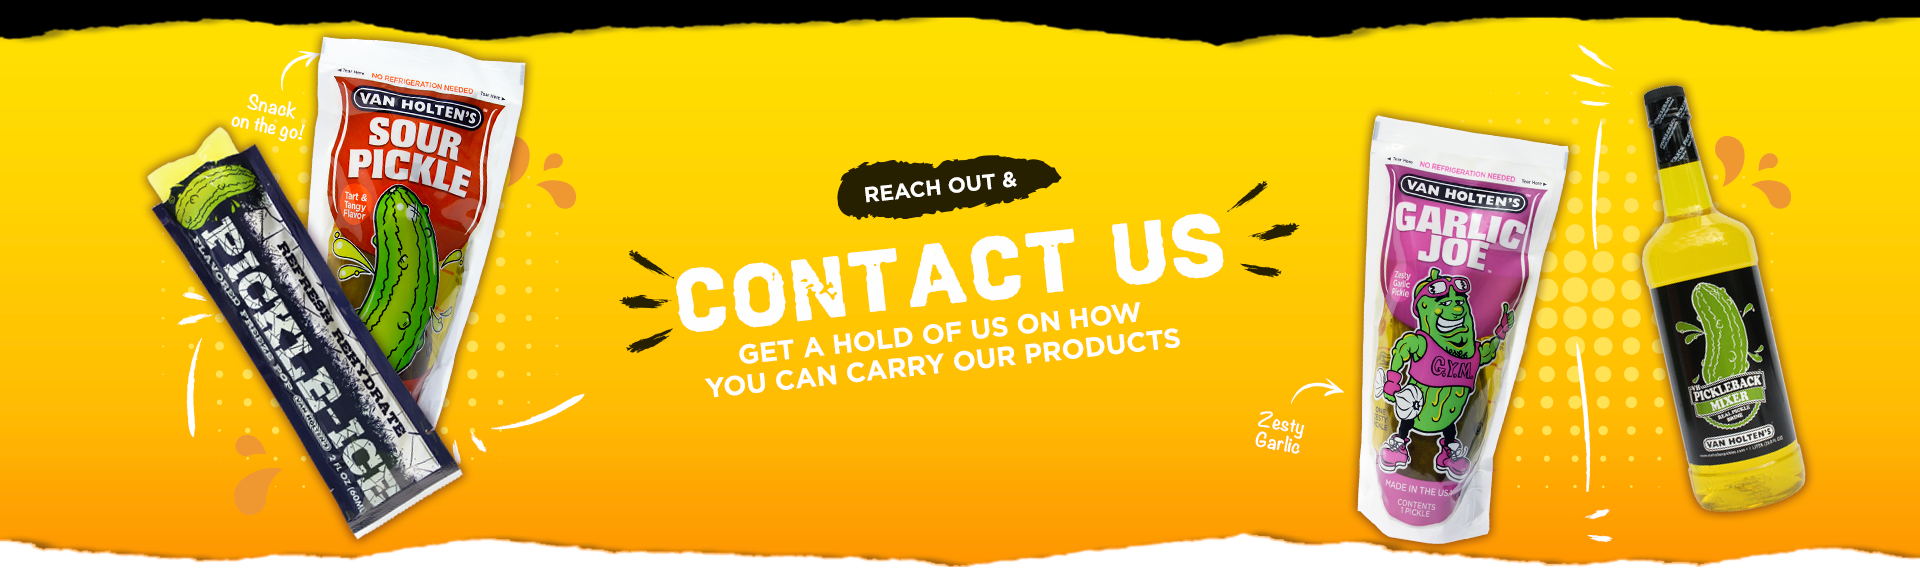 Reach out and Contact us. Get a hold of us on how you can carry our products.